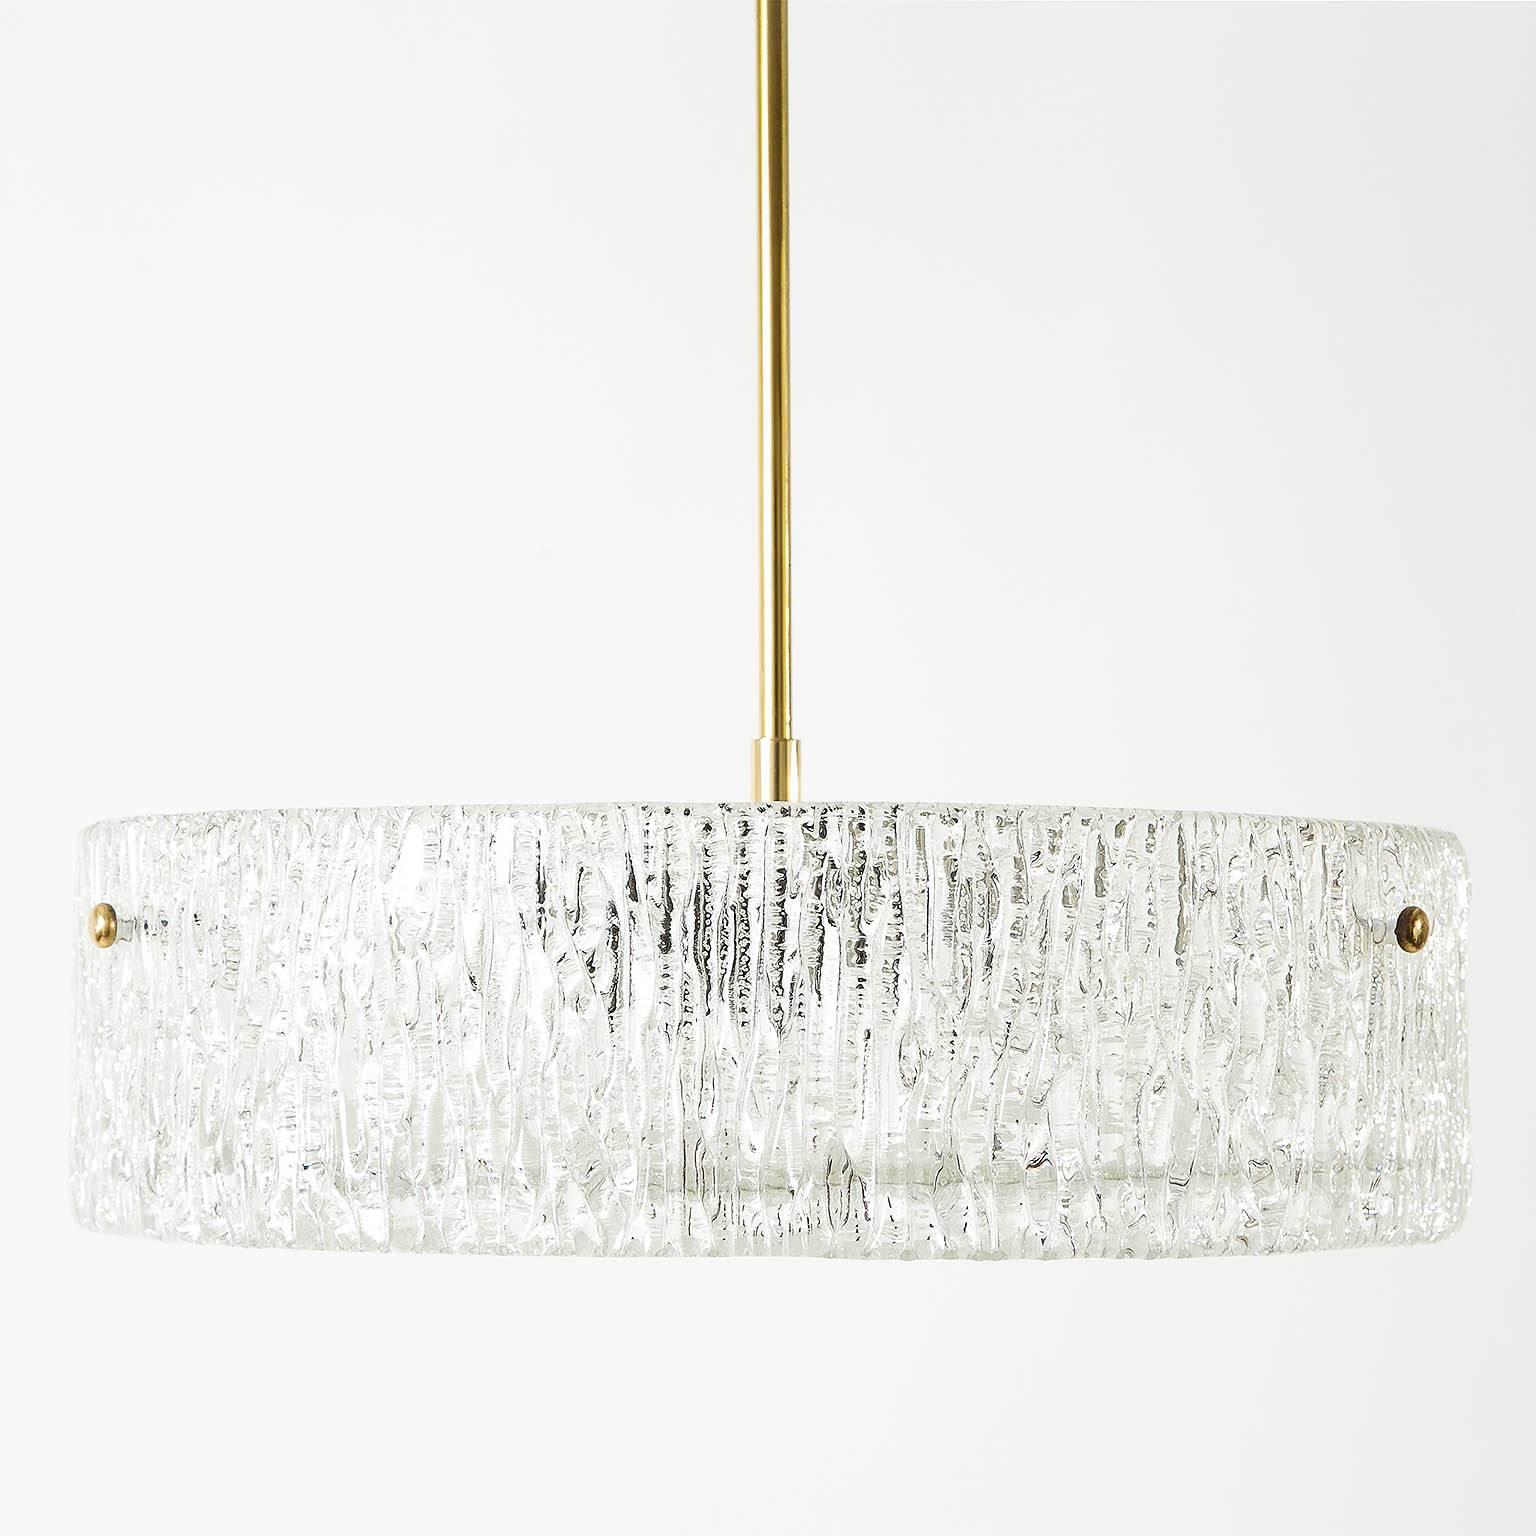 A beautiful textured glass and brass light fixture by J.T. Kalmar, Vienna, manufactured in midcentury, circa 1960 (late 1950s or early 1960s).
A round glass ring is mounted with three brass bolts on a white enameled metal frame. A textured glass